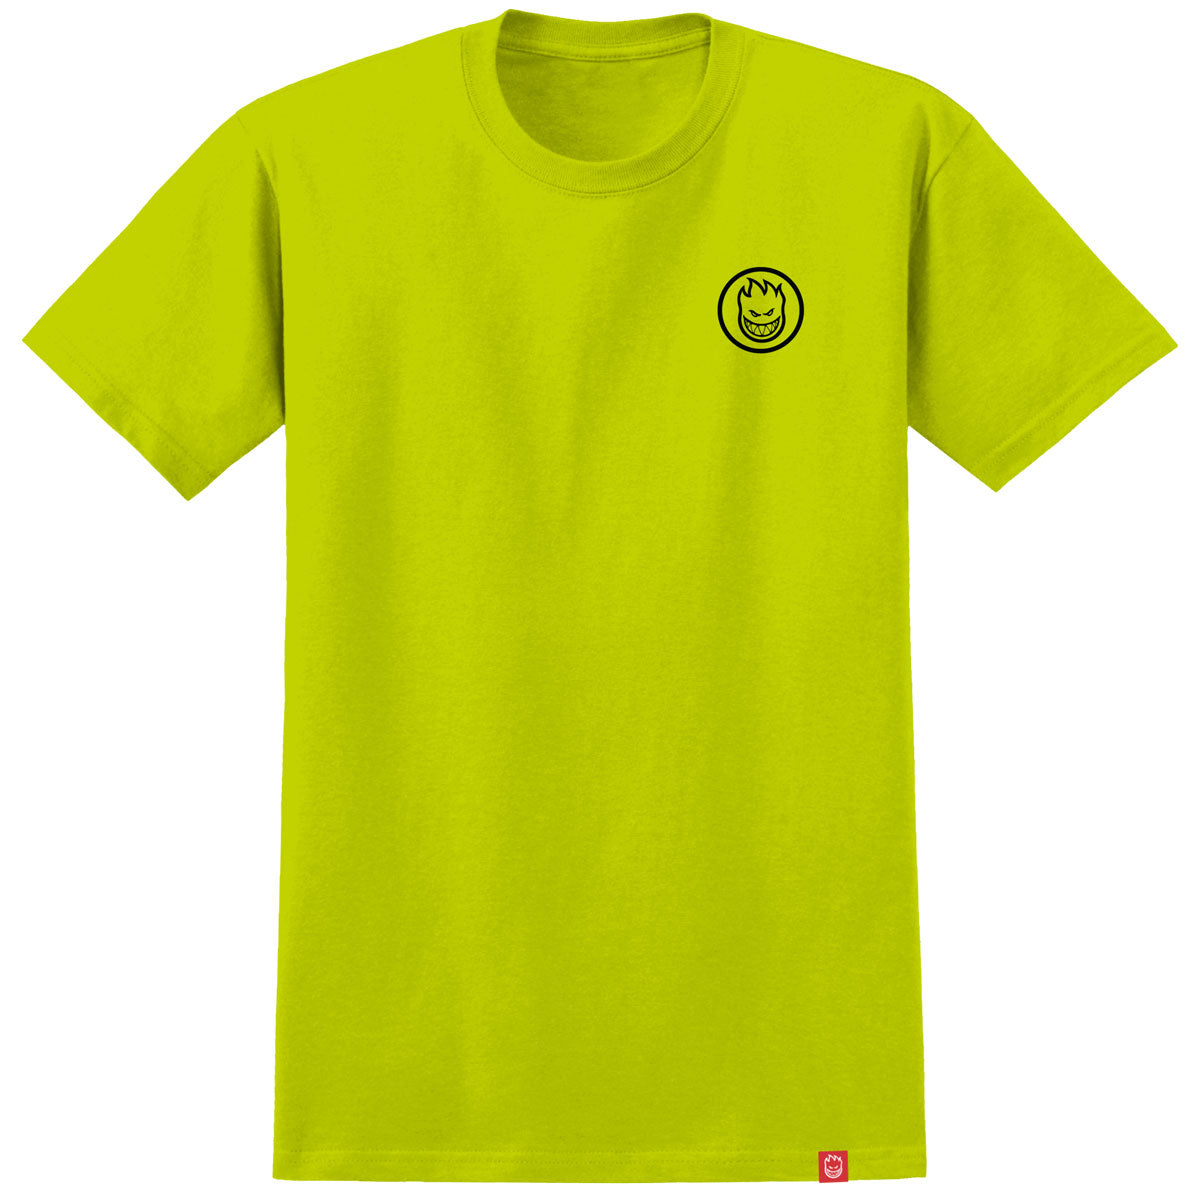 Spitfire Swirled Classic T-Shirt - Safety Green/Black image 2